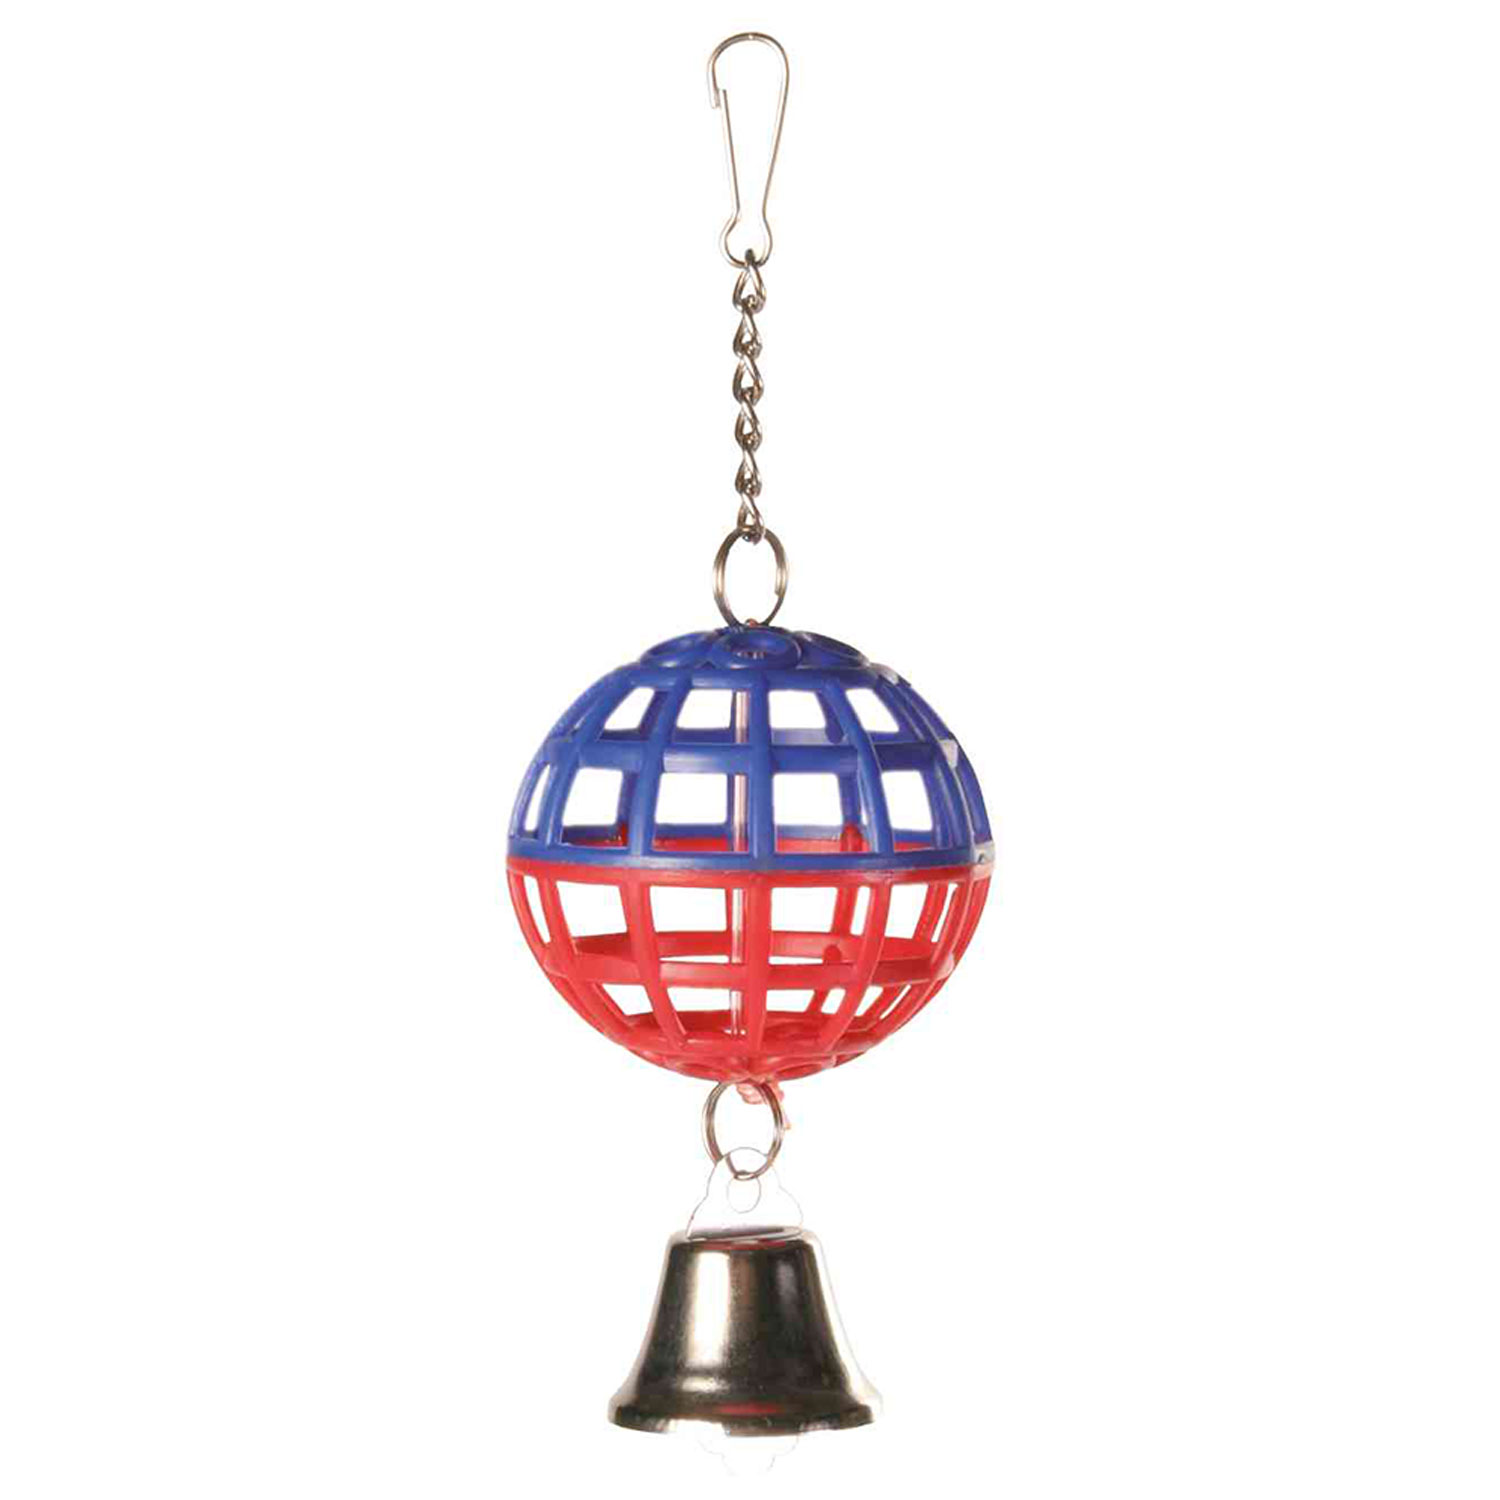 Lattice Ball With Chain And Bell 7 Cm Trixie